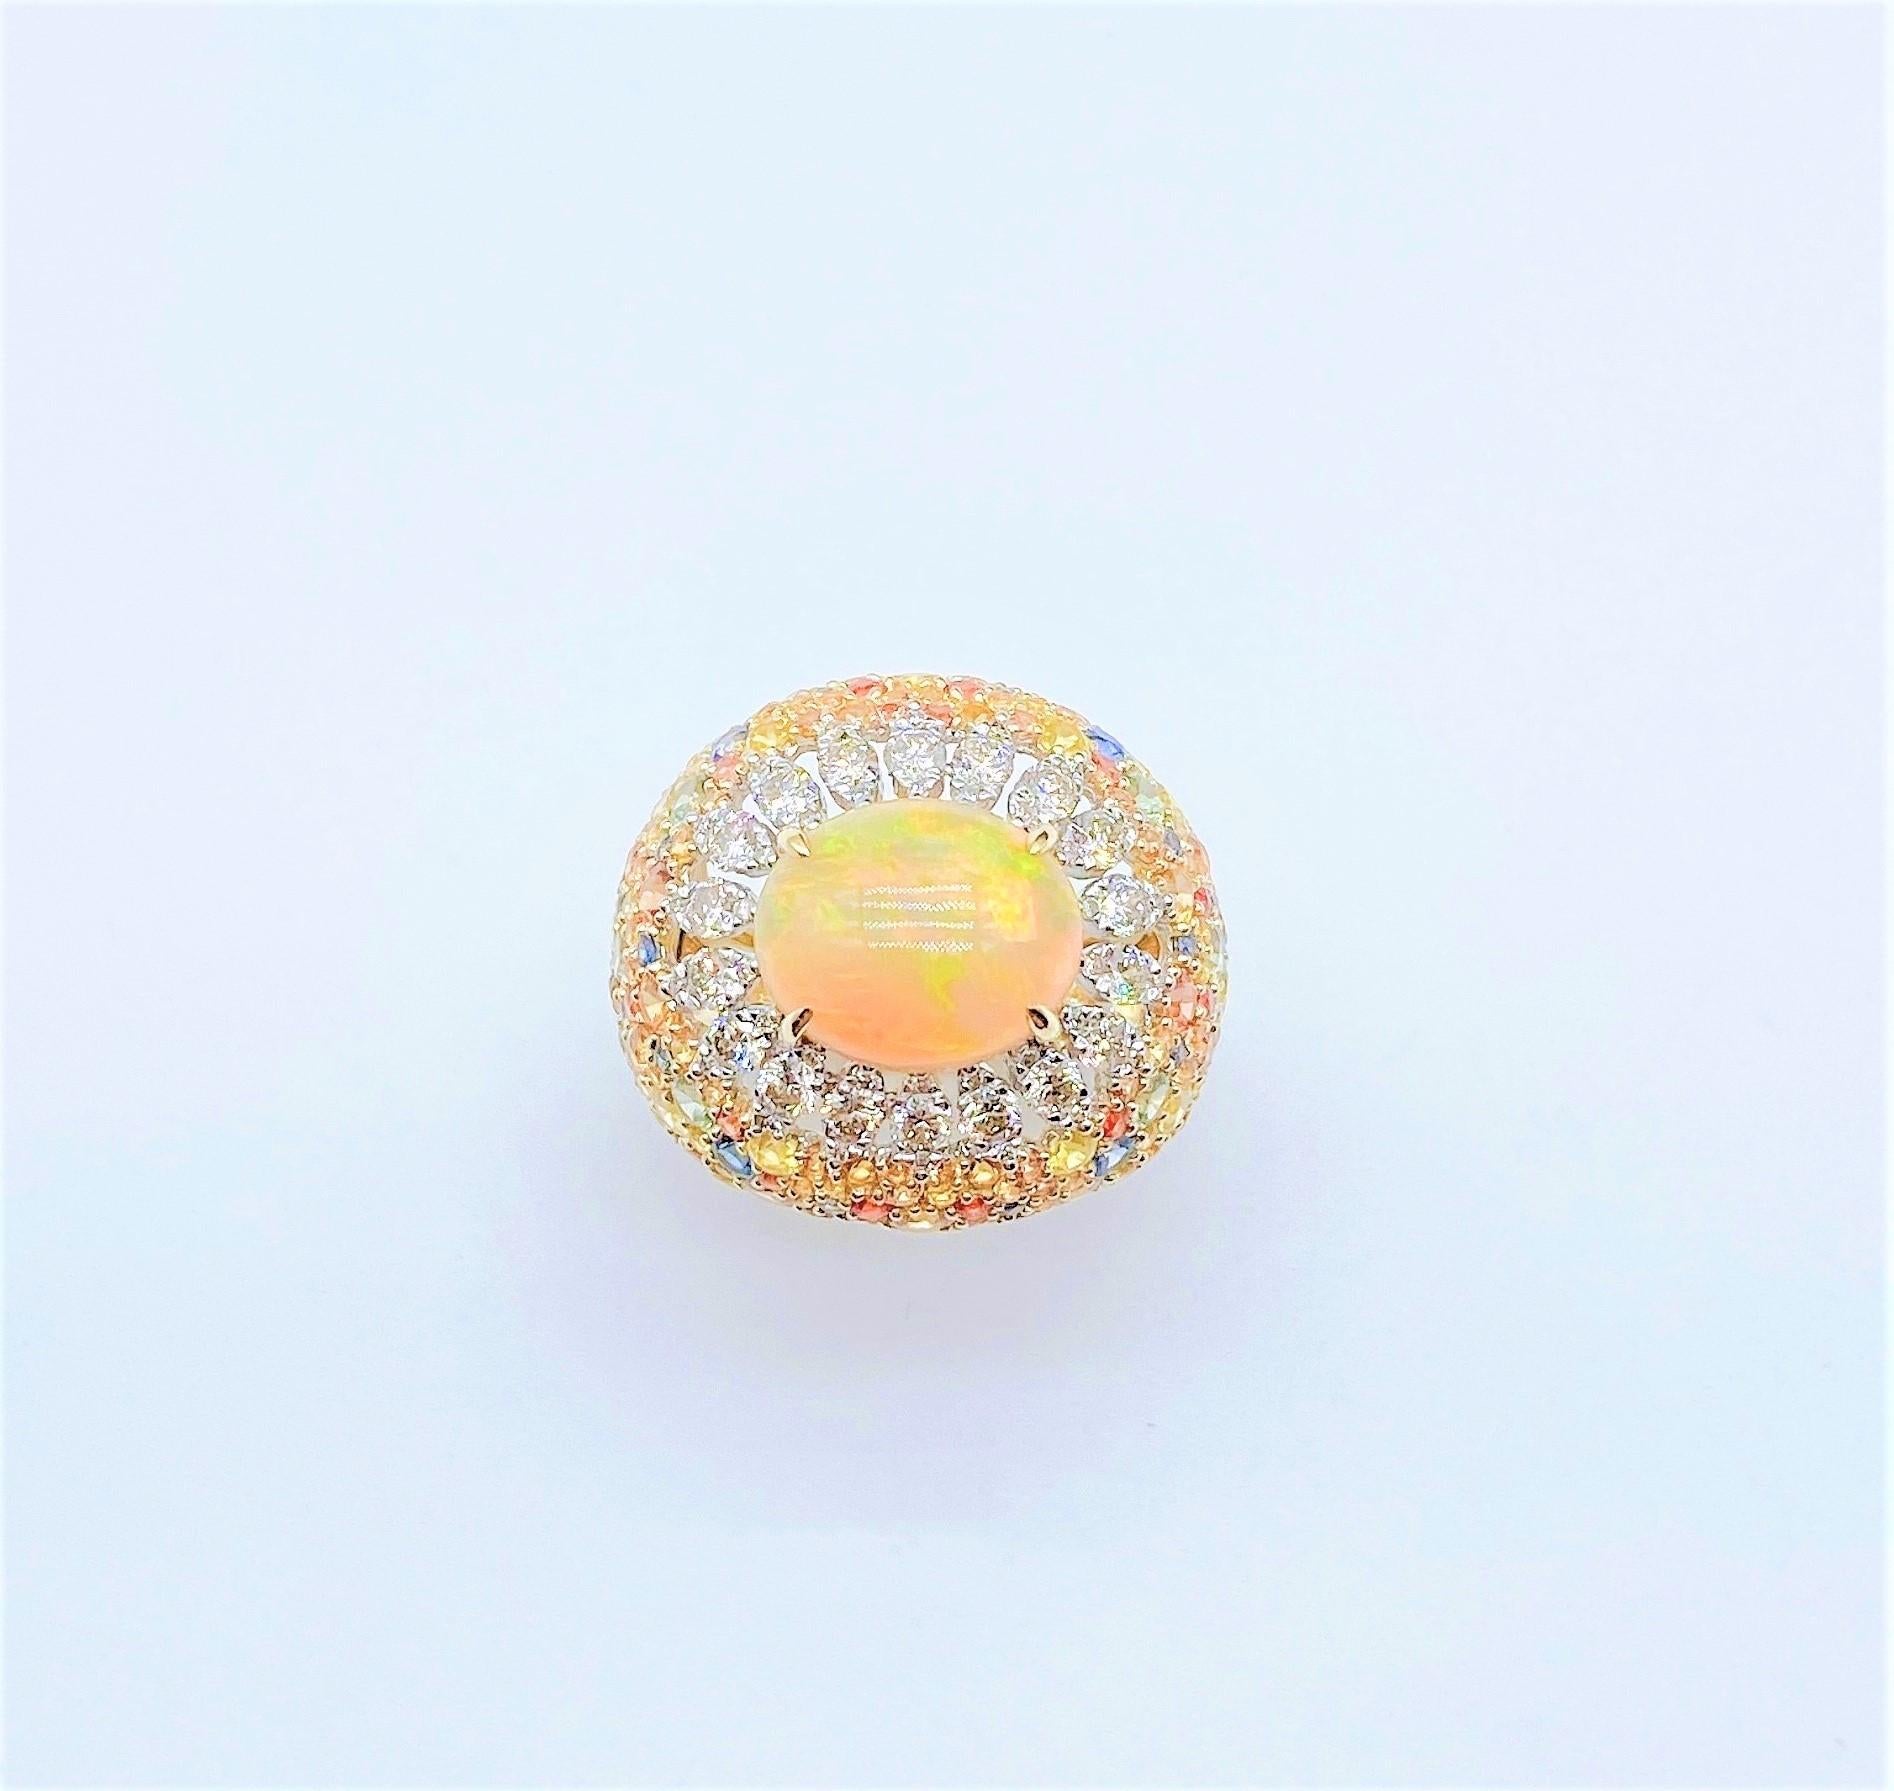 The Following Item we are offering is a Rare Important Radiant 18KT Gold Large Fancy Fiery White Opal Diamond Multi Sapphire Ring. Ring is comprised of A LARGE Gorgeous Fancy Fiery White Rainbow Opal surrounded by Beautiful Glittering Diamonds and